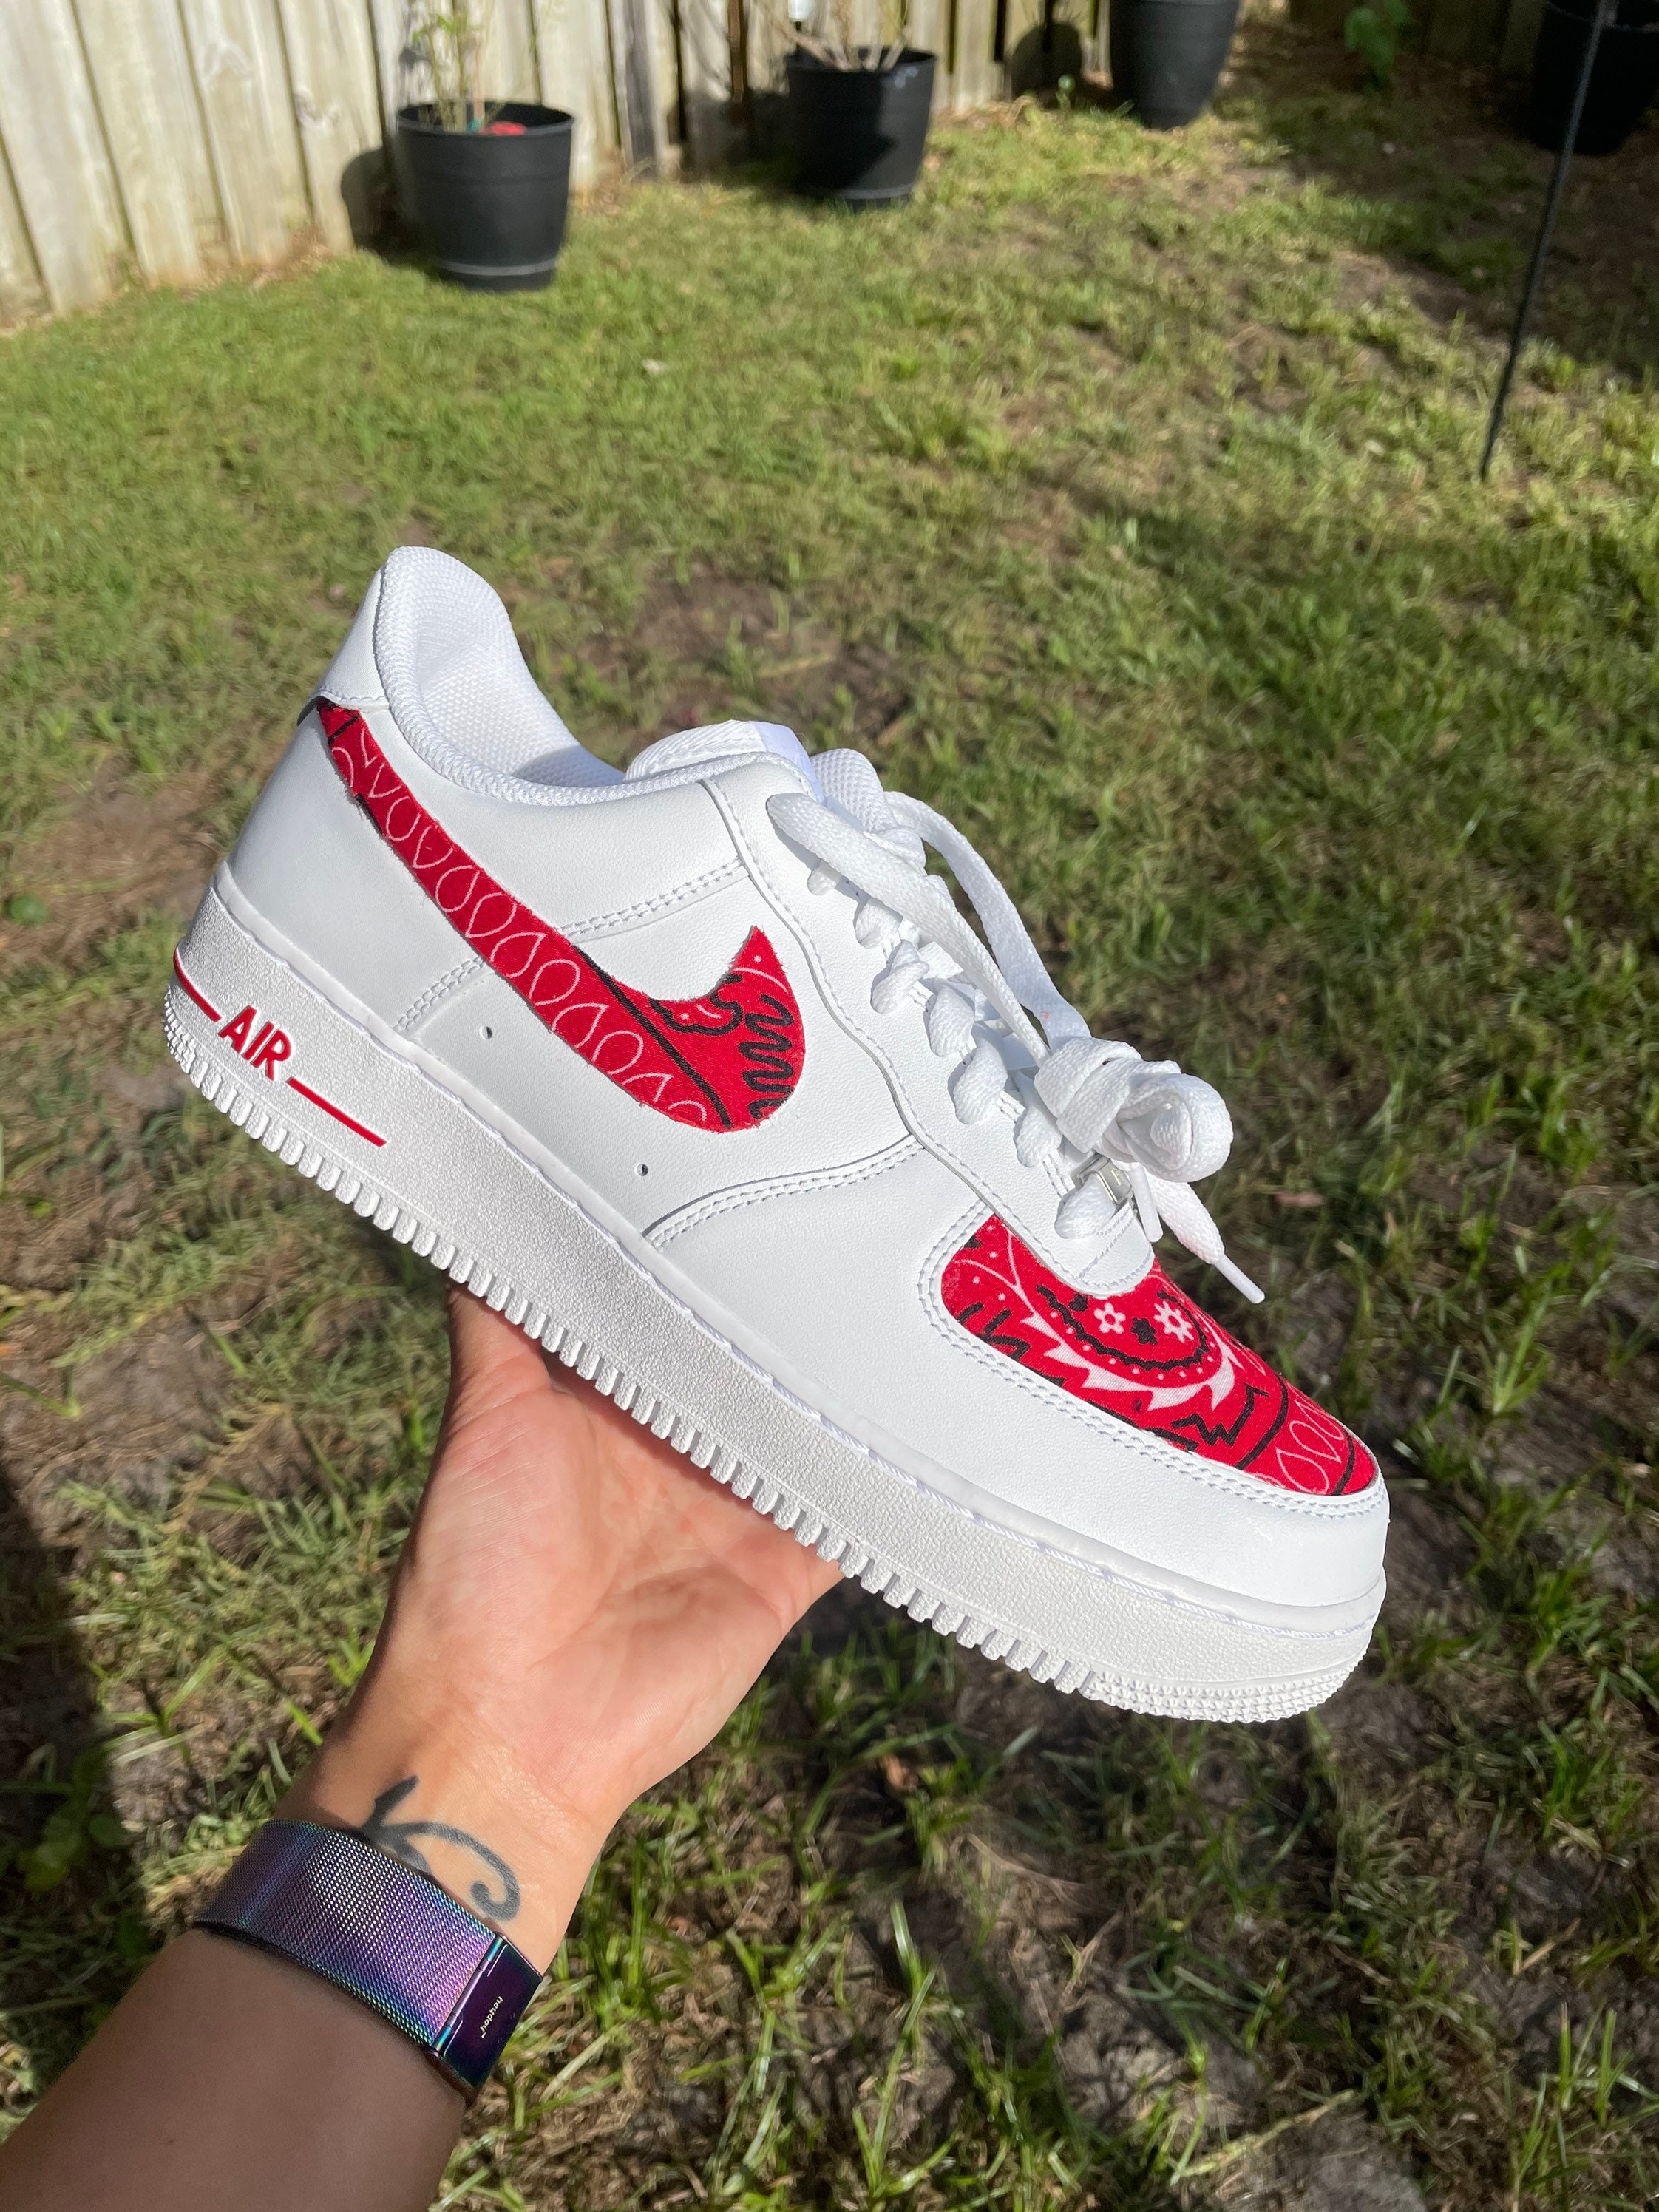 red bandanna air forces